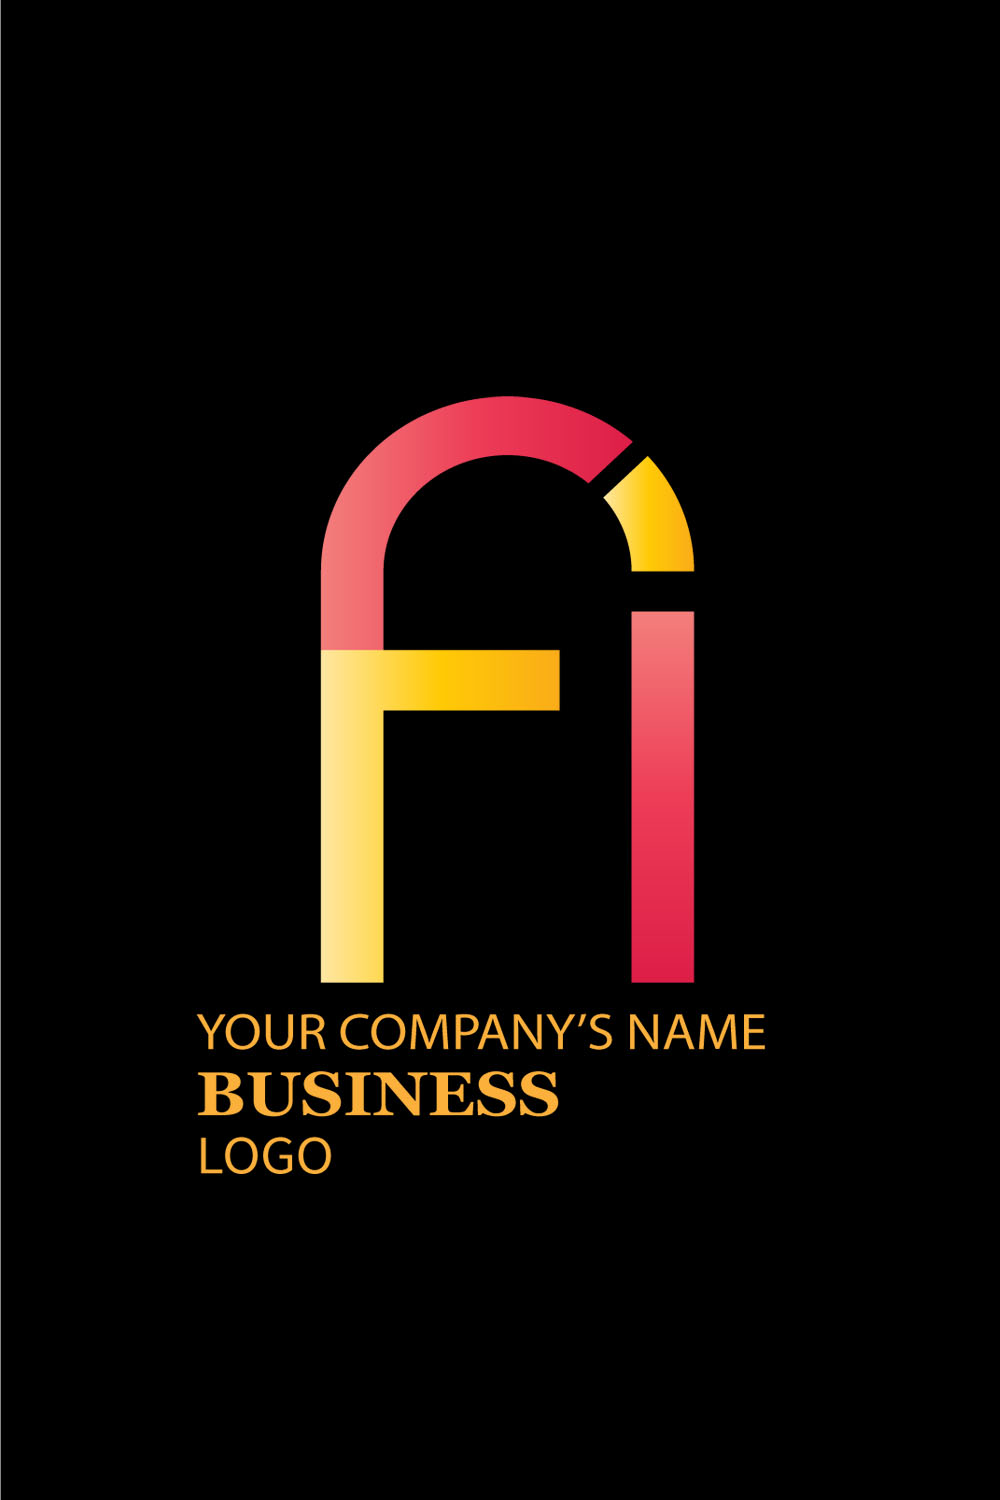 An image of a logo with the letters FL with a beautiful design